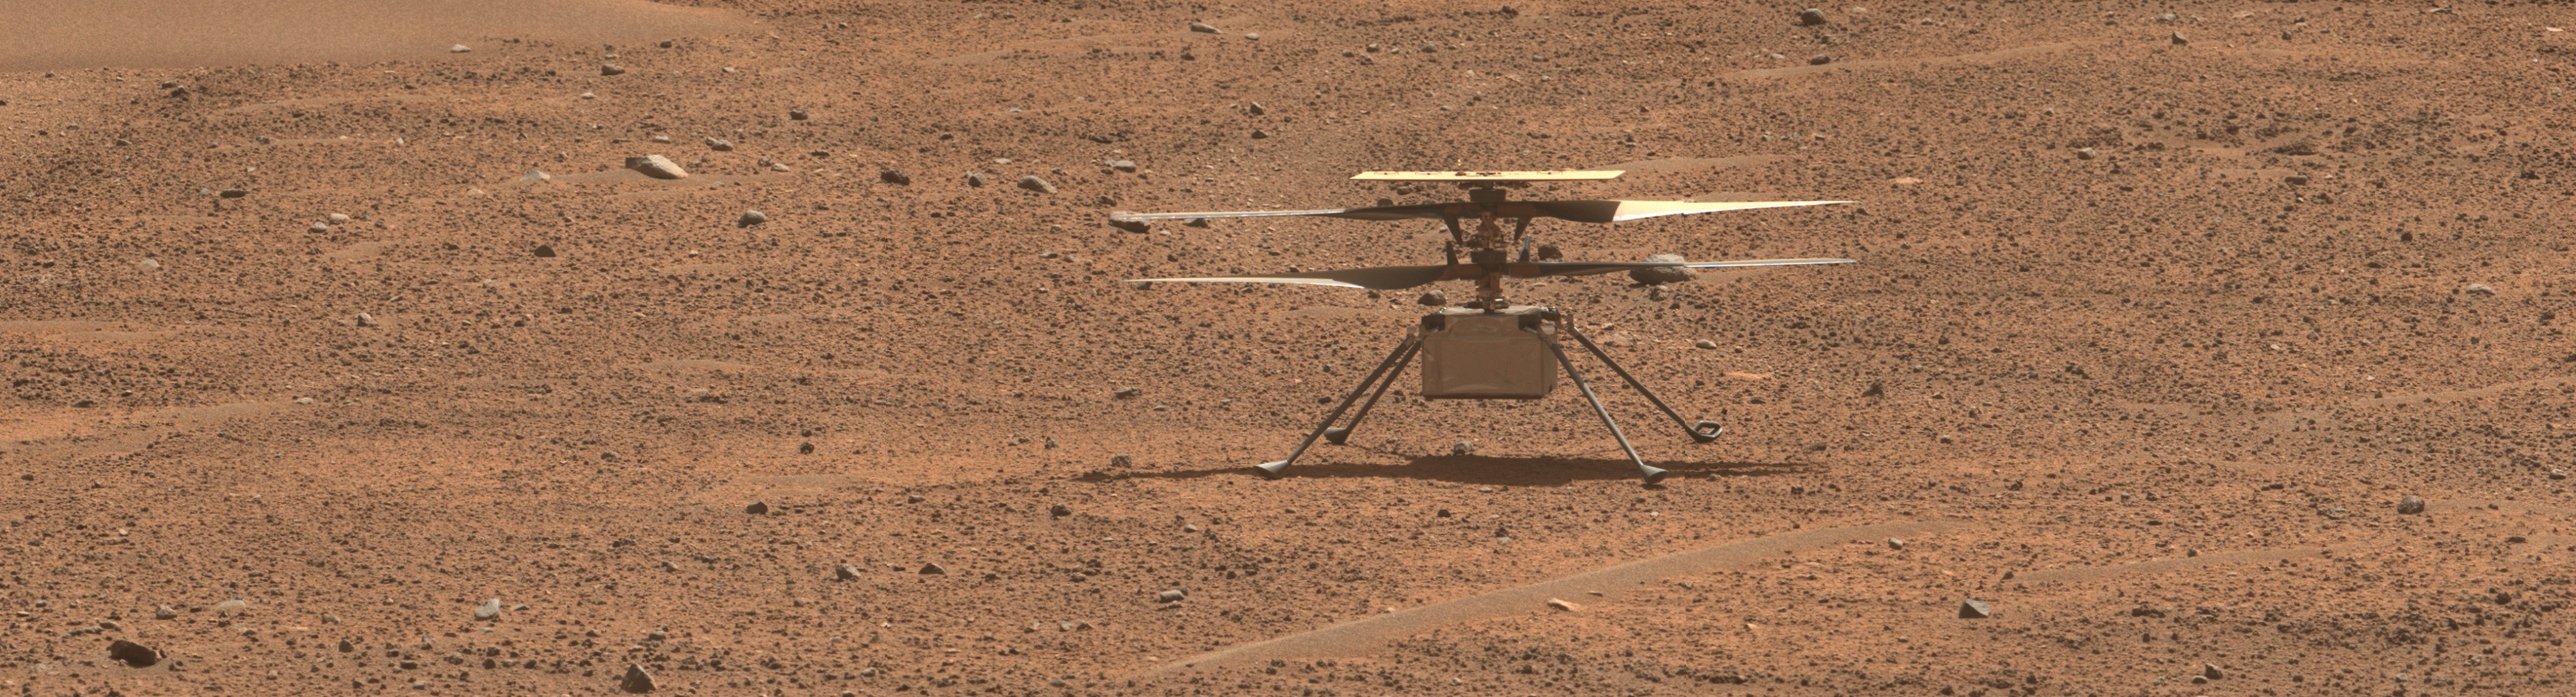 Ingenuity Helicopter on the surface of Mars